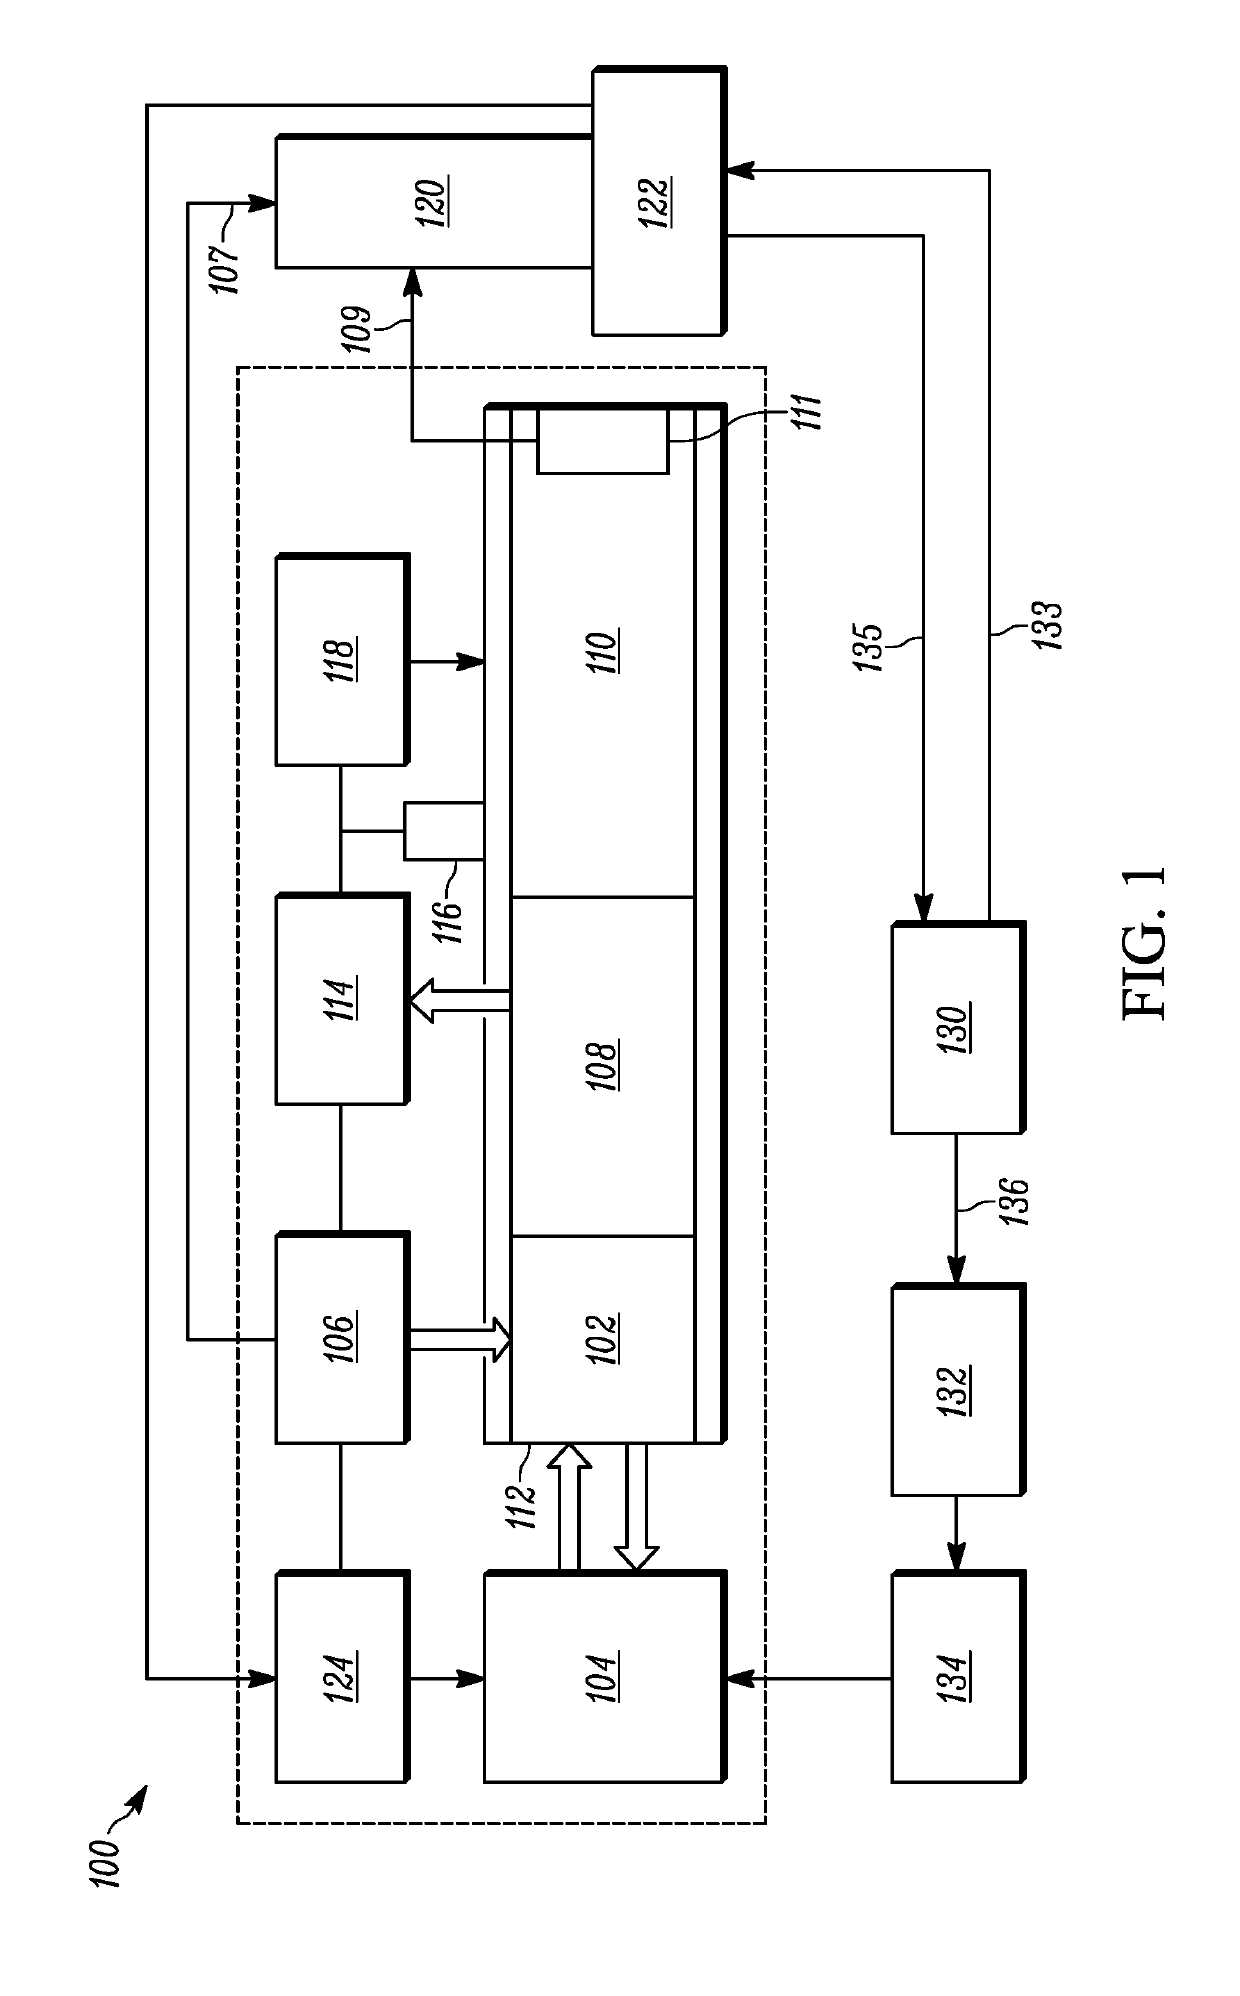 Mass spectrometry method and apparatus for clinical diagnostic applications